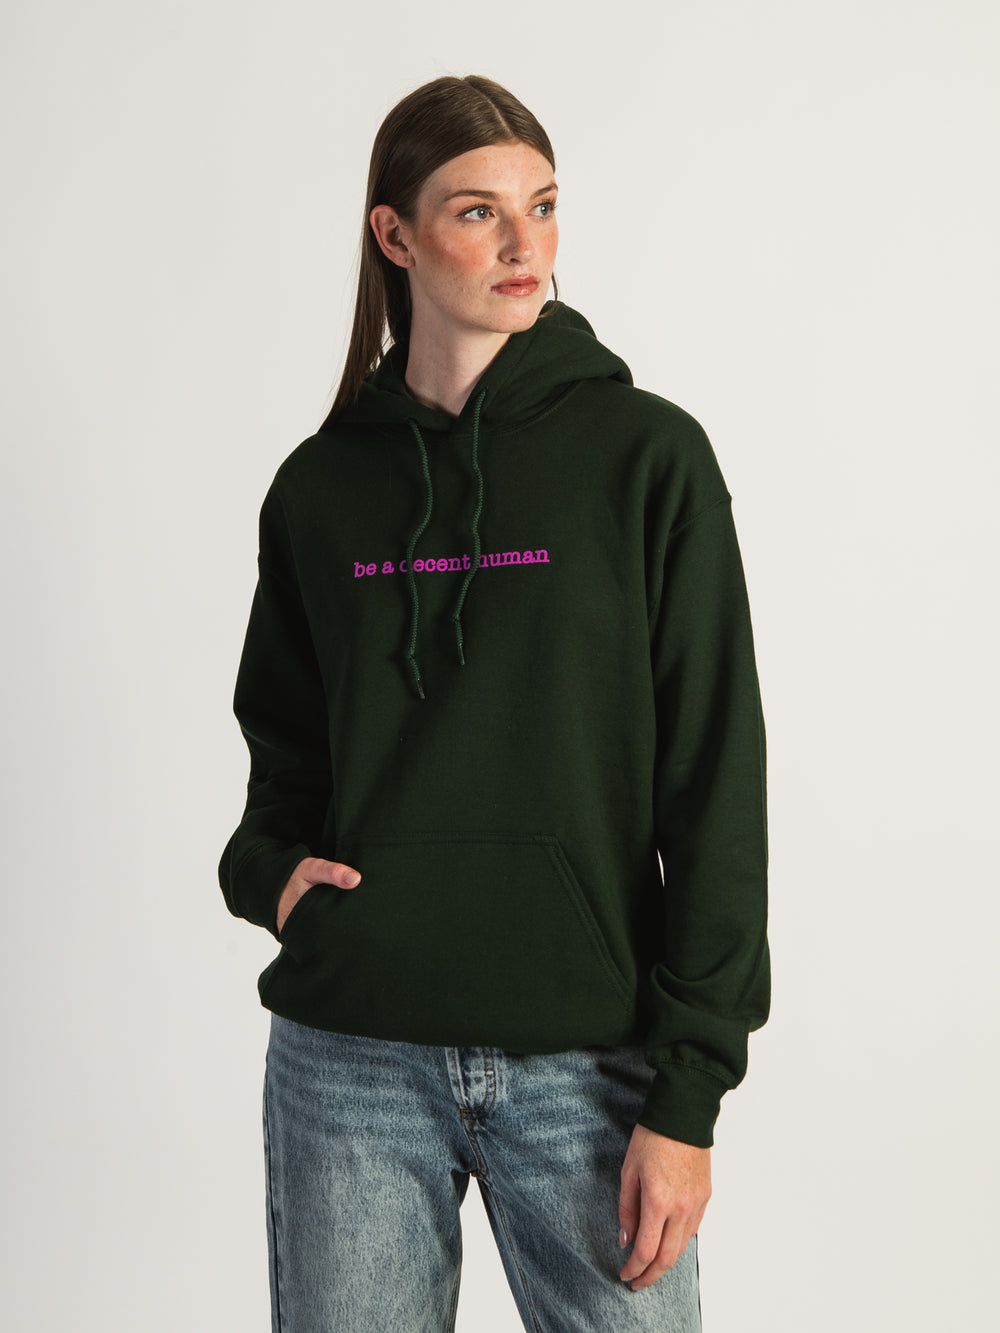 BARSTOOL SPORTS BE A DECENT HUMAN HOODIE